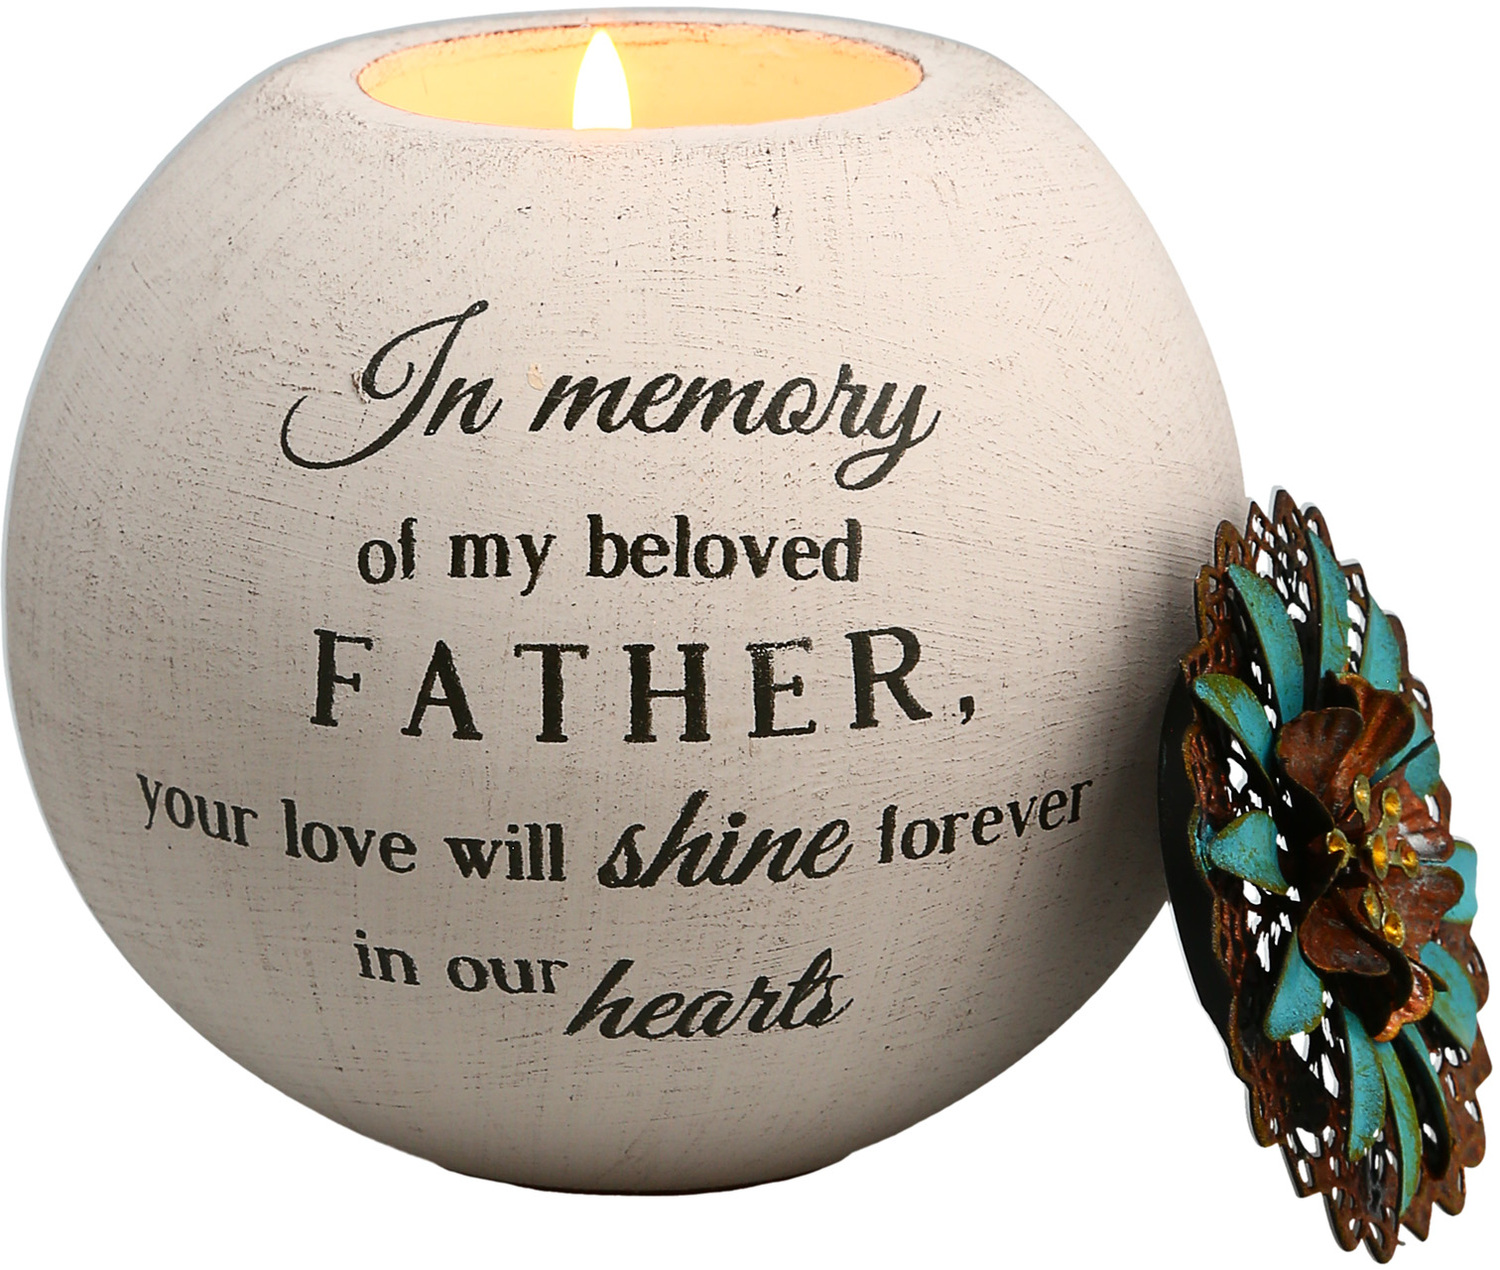 Father by Light Your Way Memorial - Father -   4" Round Tea Light Candle Holder